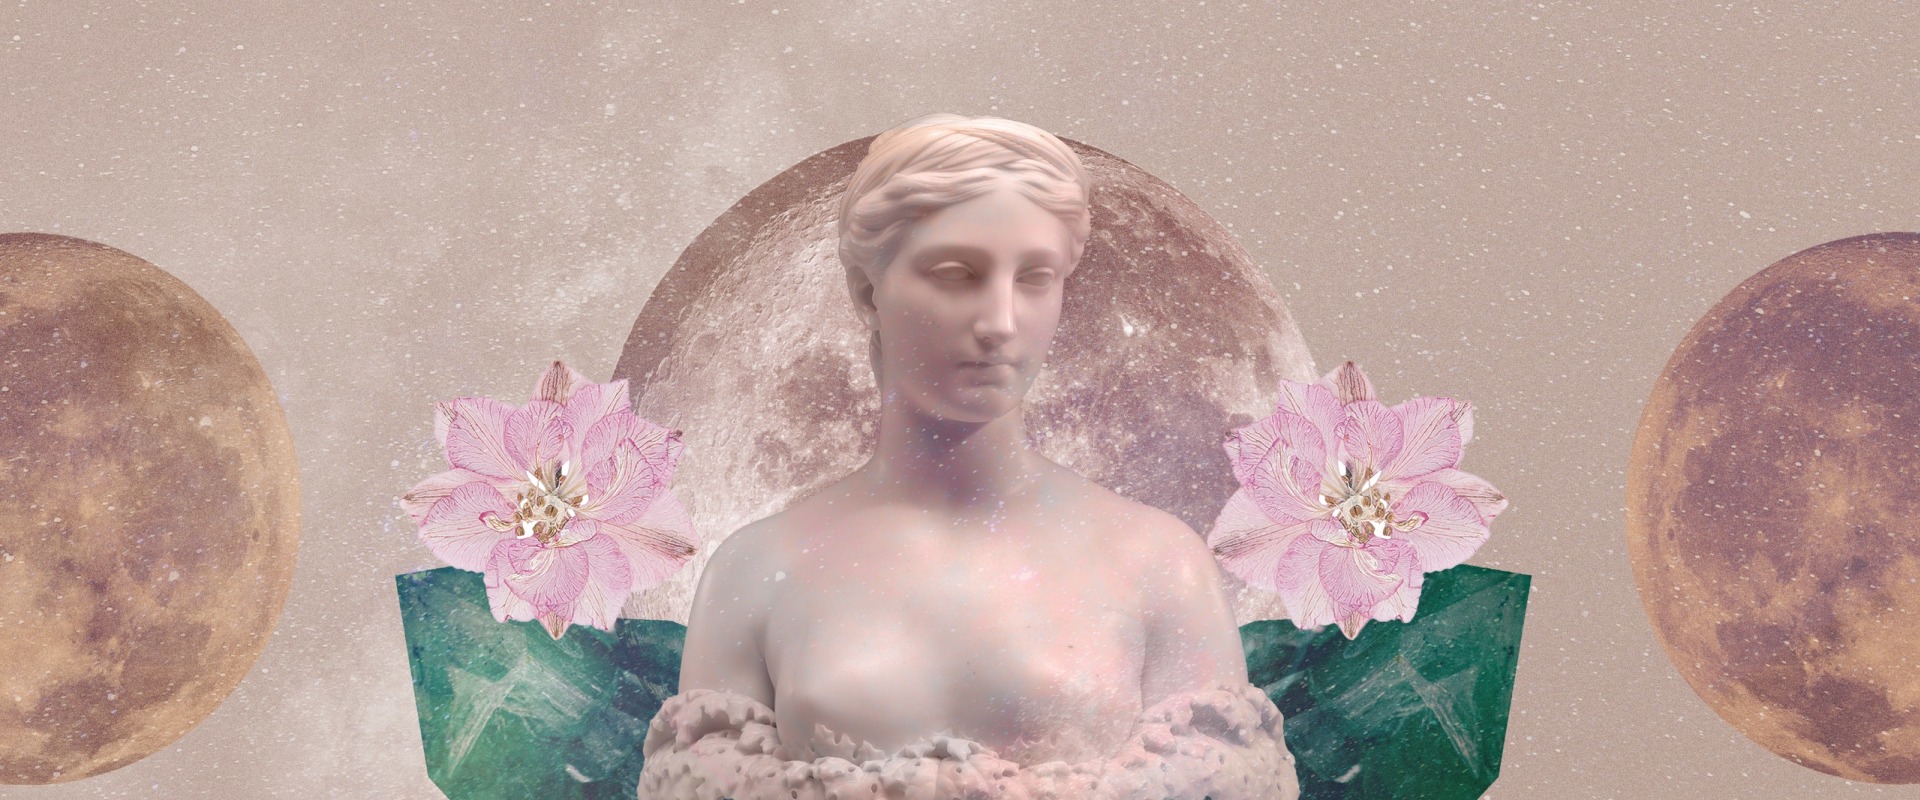 Virgo Monthly Horoscope: What to Expect This Month